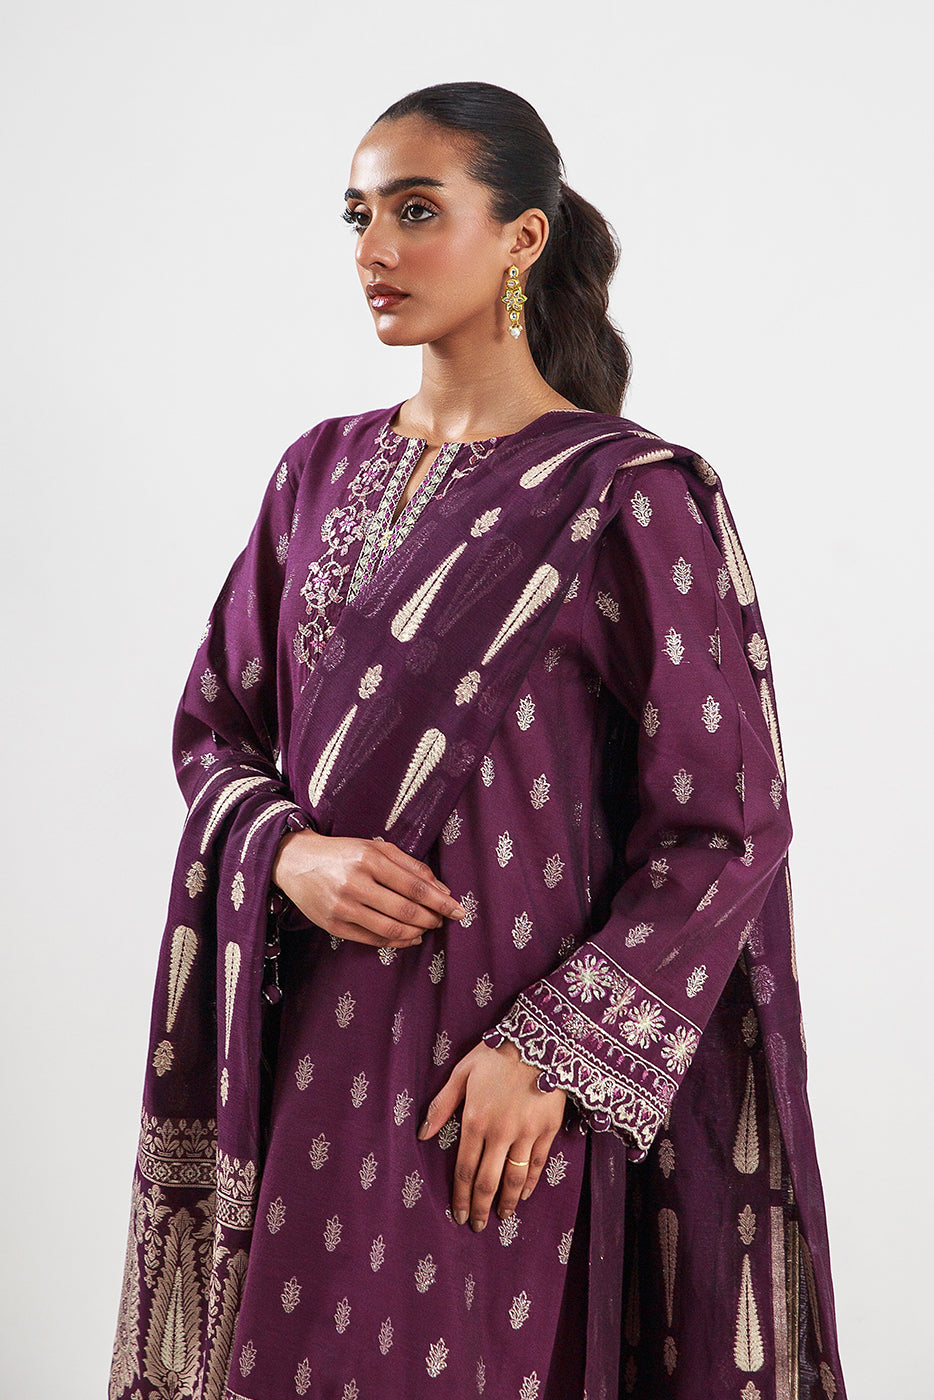 3 PIECE EMBROIDERED JACQUARD SUIT-PLUM SEQUIN (UNSTITCHED) - BEECHTREE